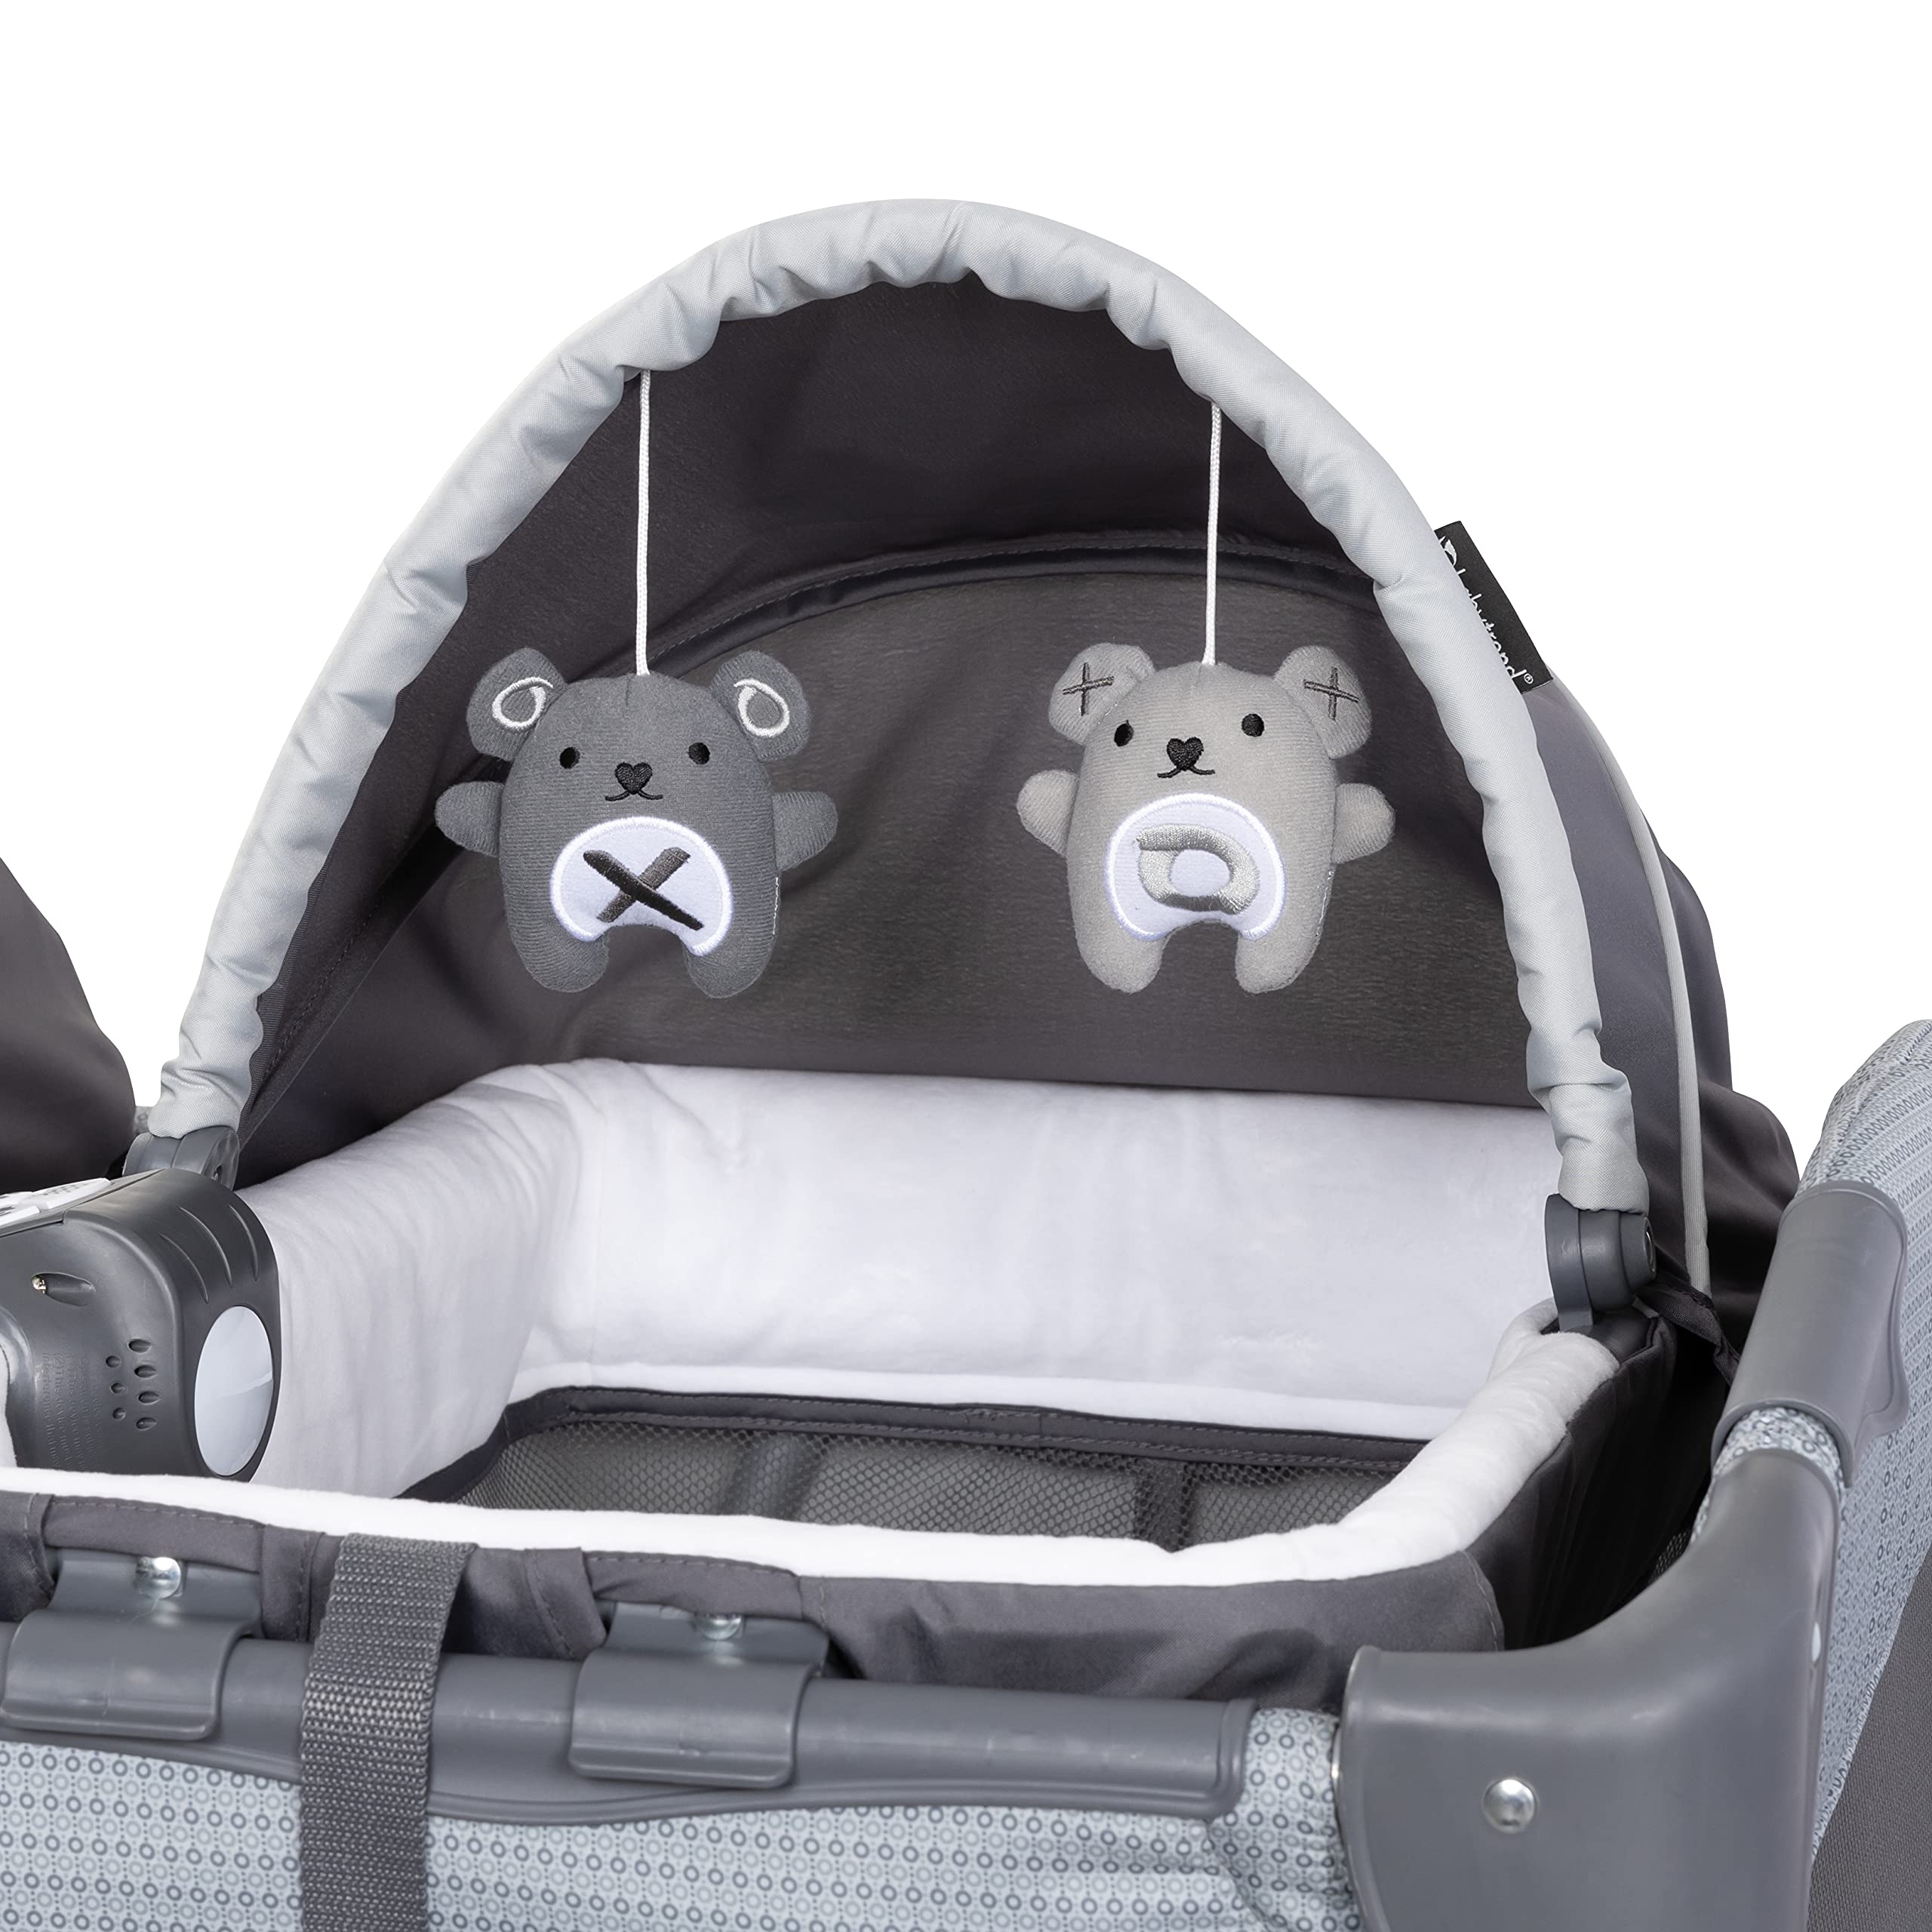 Baby Trend Lil' Snooze Deluxe III for Twins,Cozy Grey